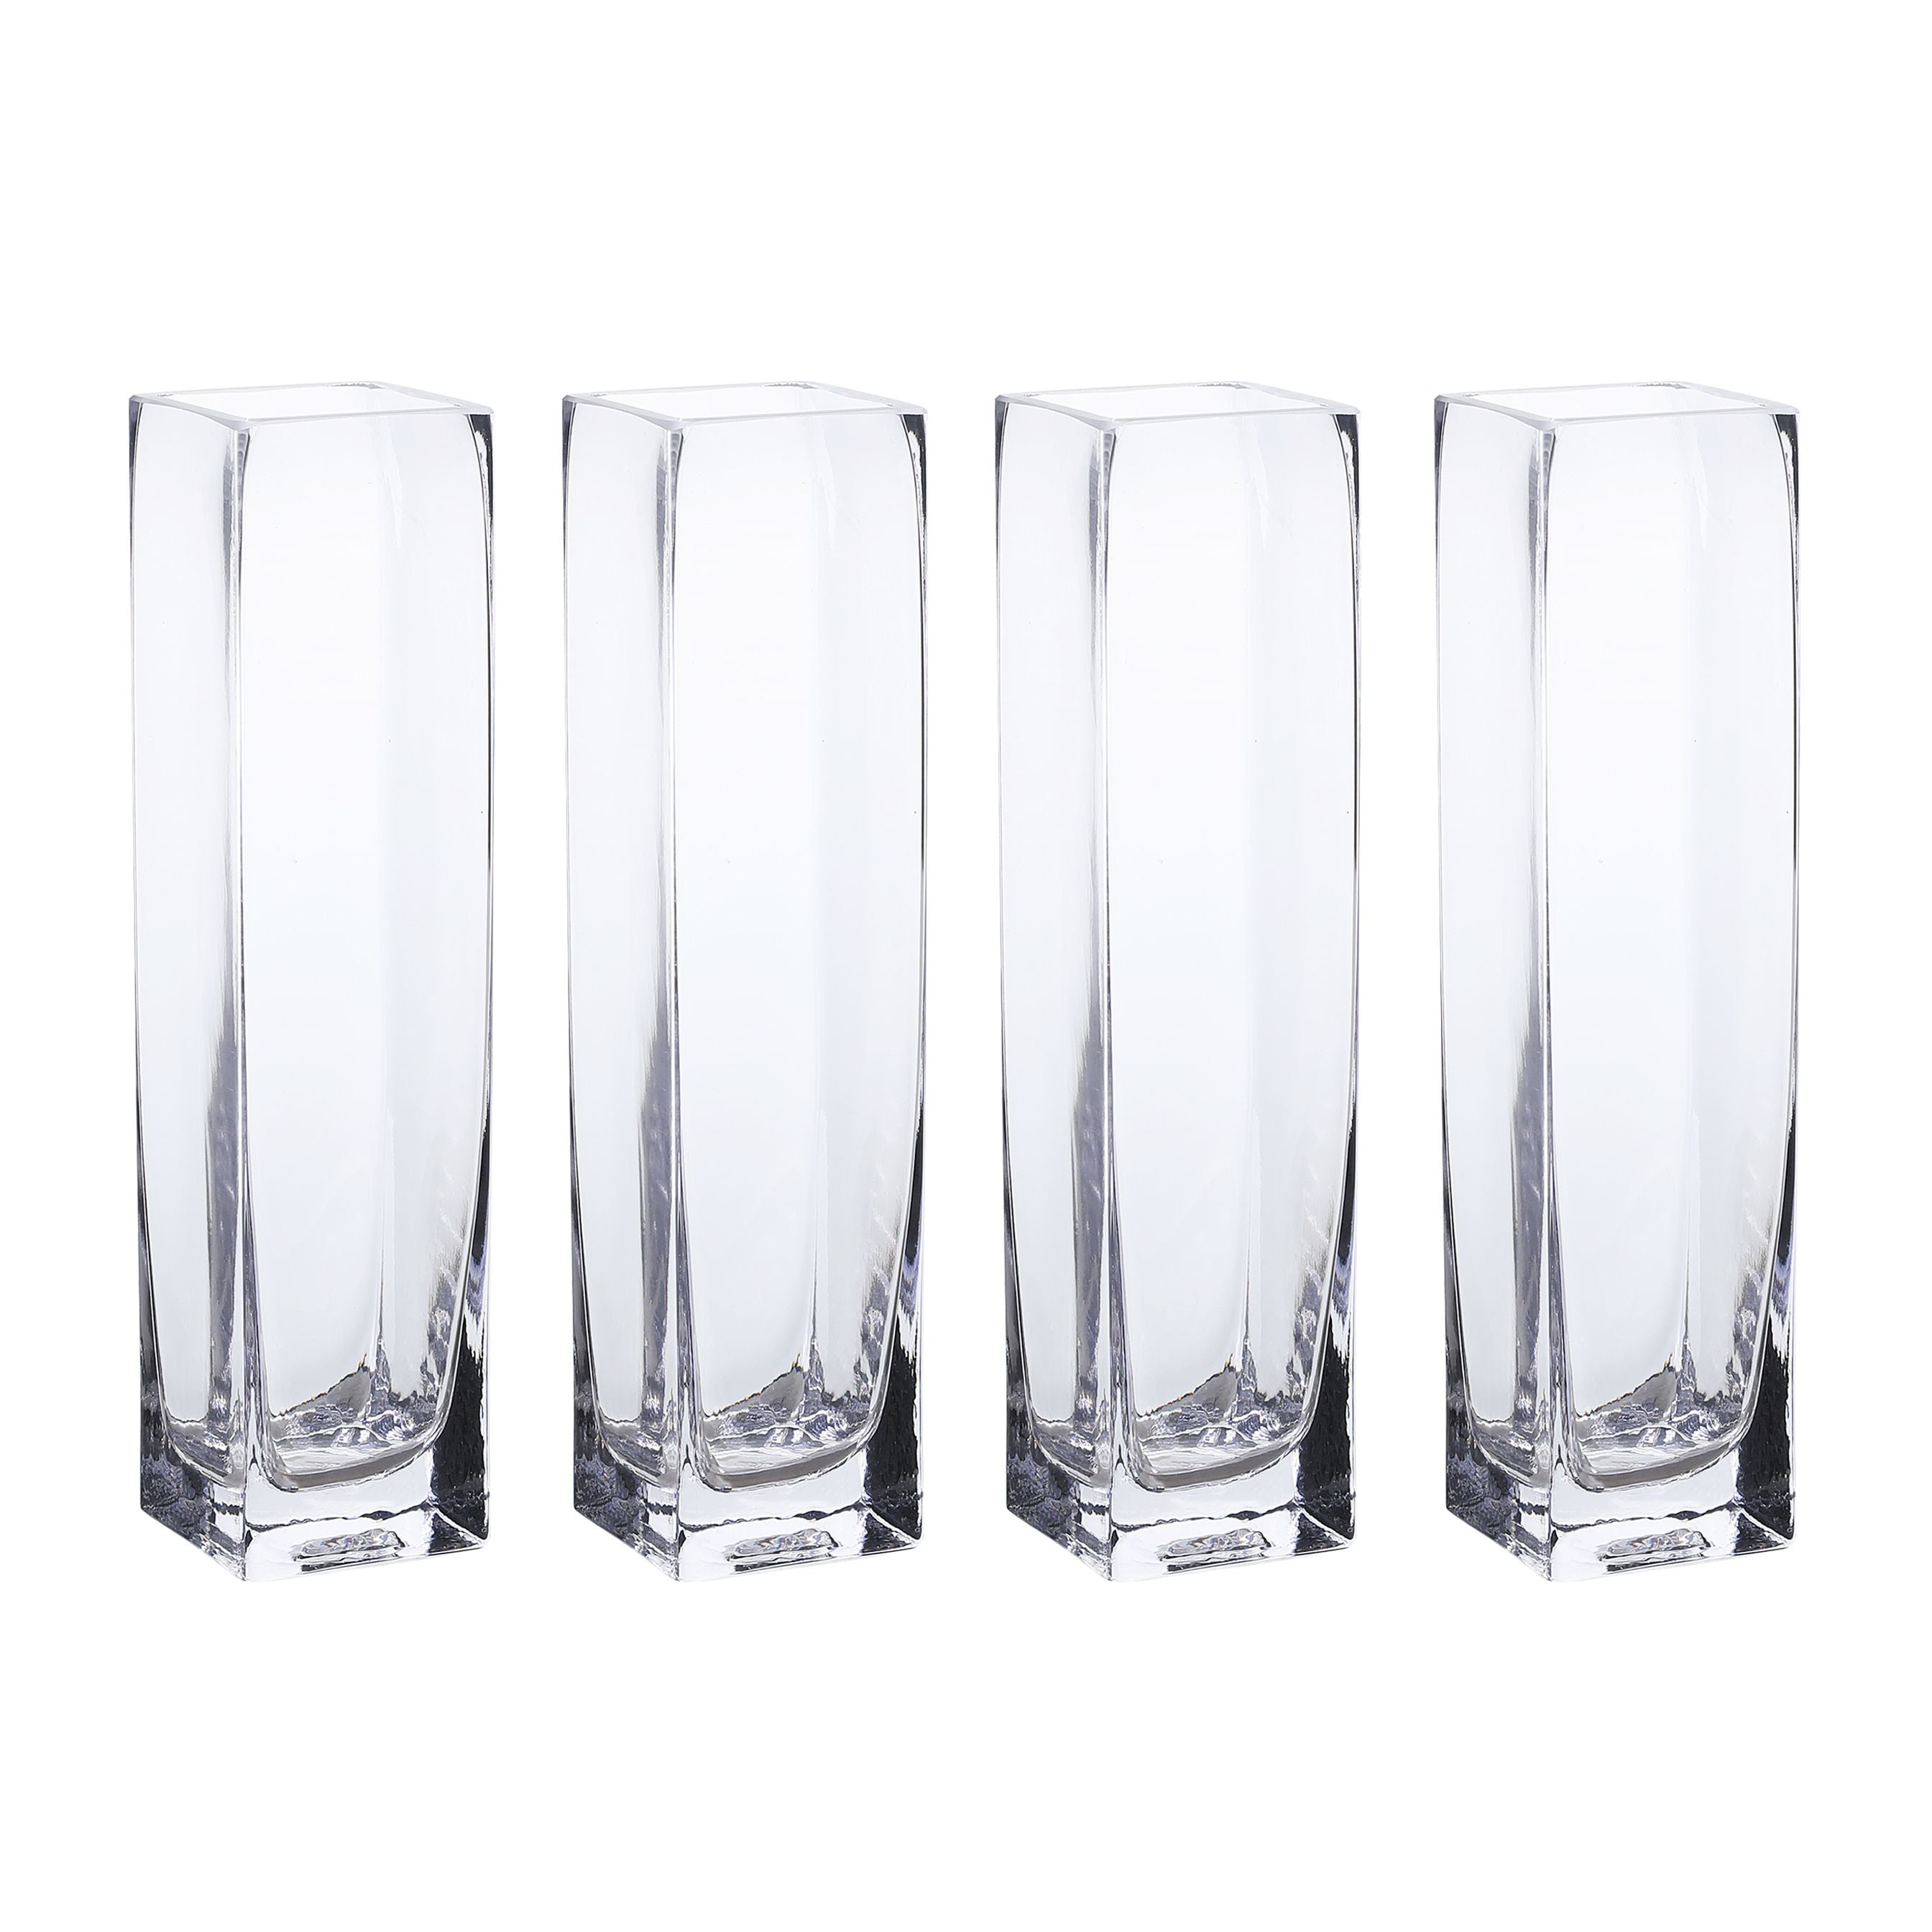 Clear Square Glass Vase Set Of 4 2 35x10inch